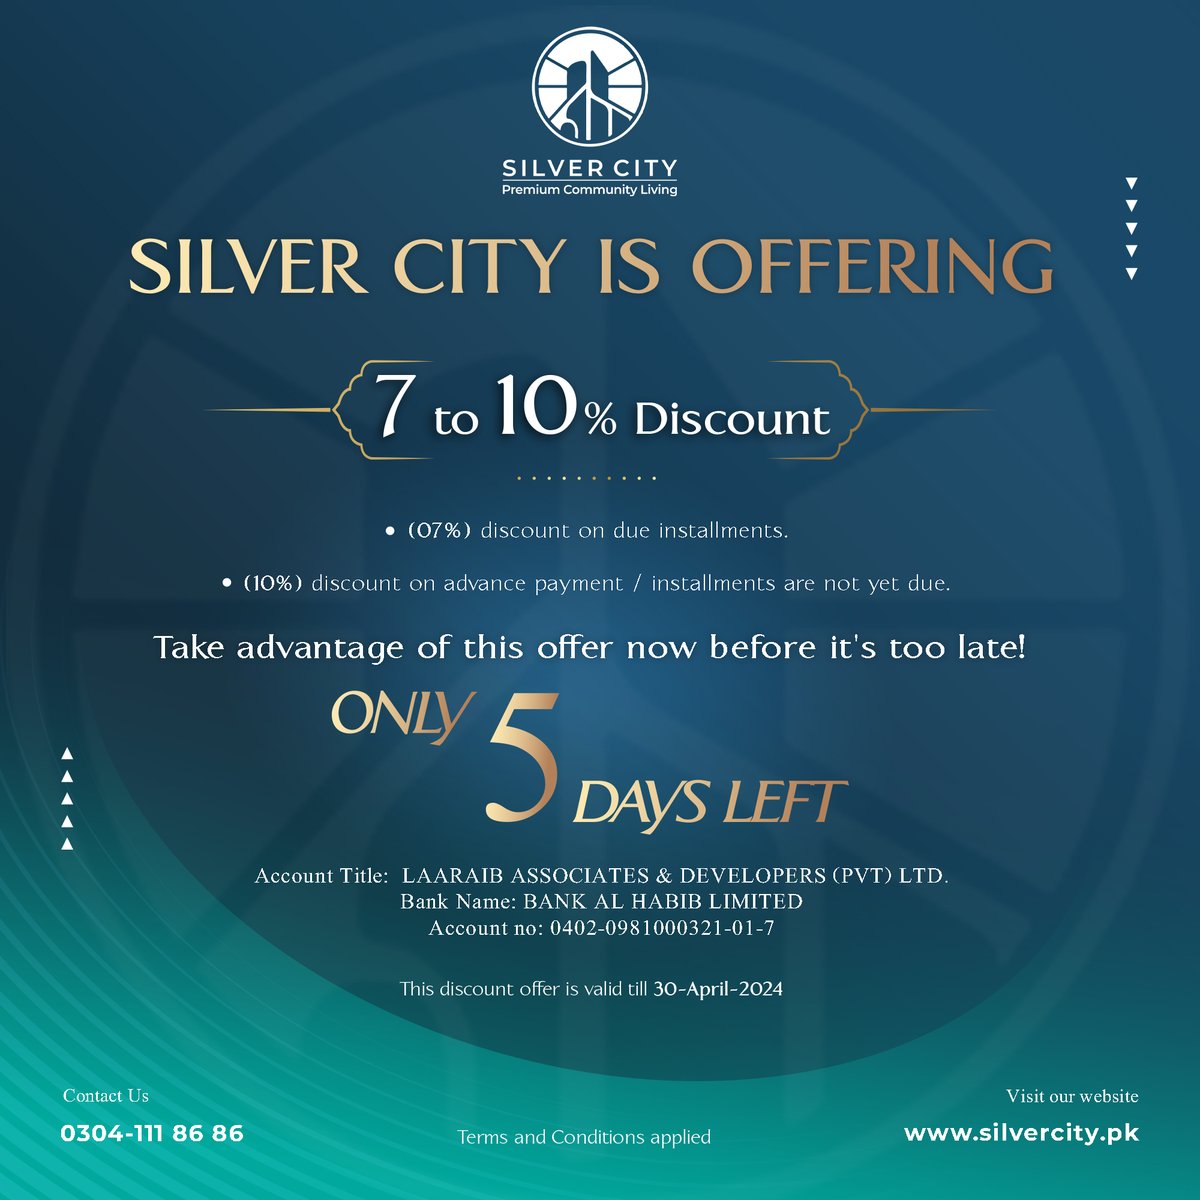 Act fast! Just 5 days left to seize our exclusive savings at Silver City! Make a smart investment and secure your future with us today!

UAN: 0304-111 86 86

#SilverCity #ExclusiveOffer #DiscountOffer #plotsoninstallment #InvestWisely #RealEstateInvestment #SavingsOpportunity